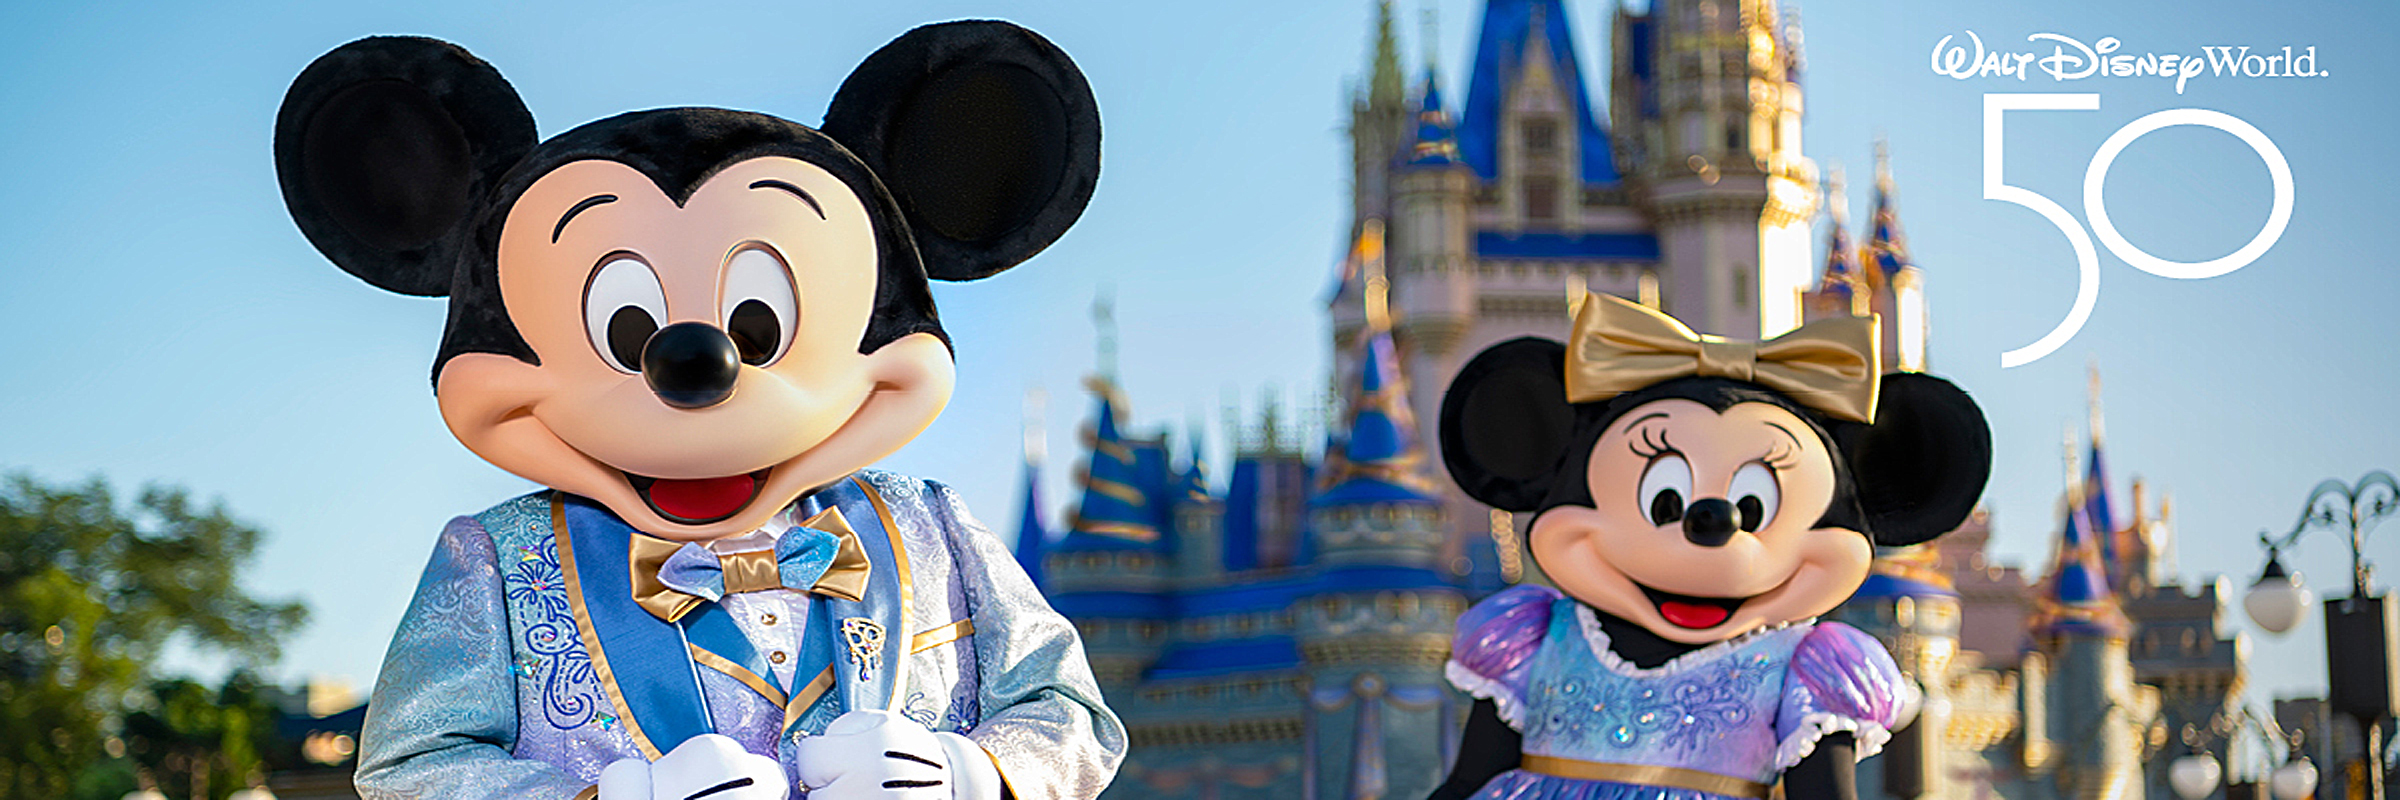 Sell Disney Vacations from Home as a Disney Travel Agent with Academy Travel